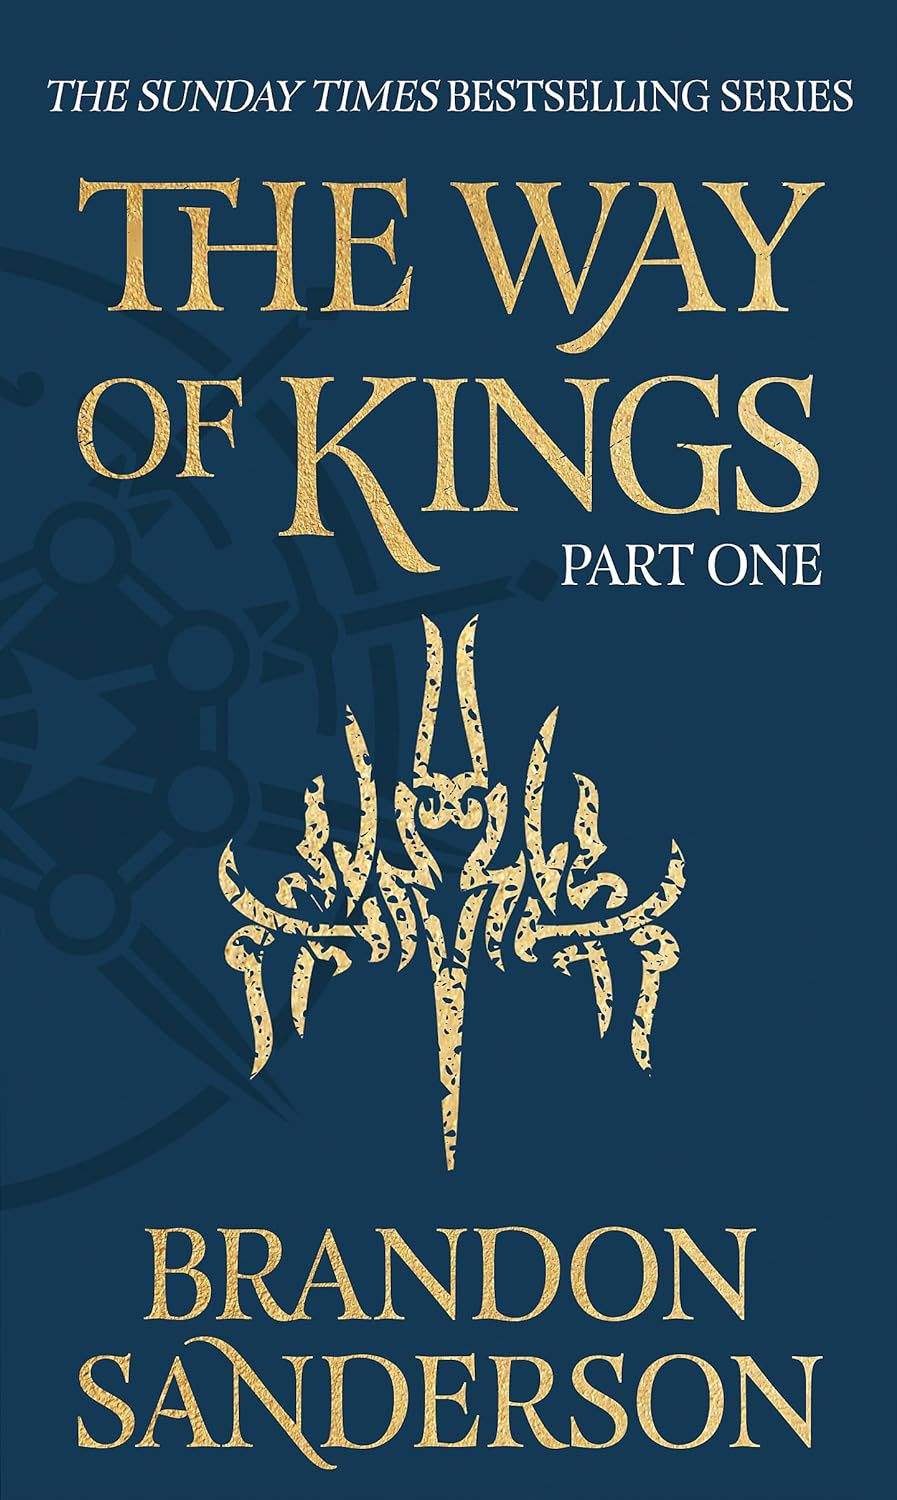 The book cover for The Way of Kings shows a simple golden design on a blue background.